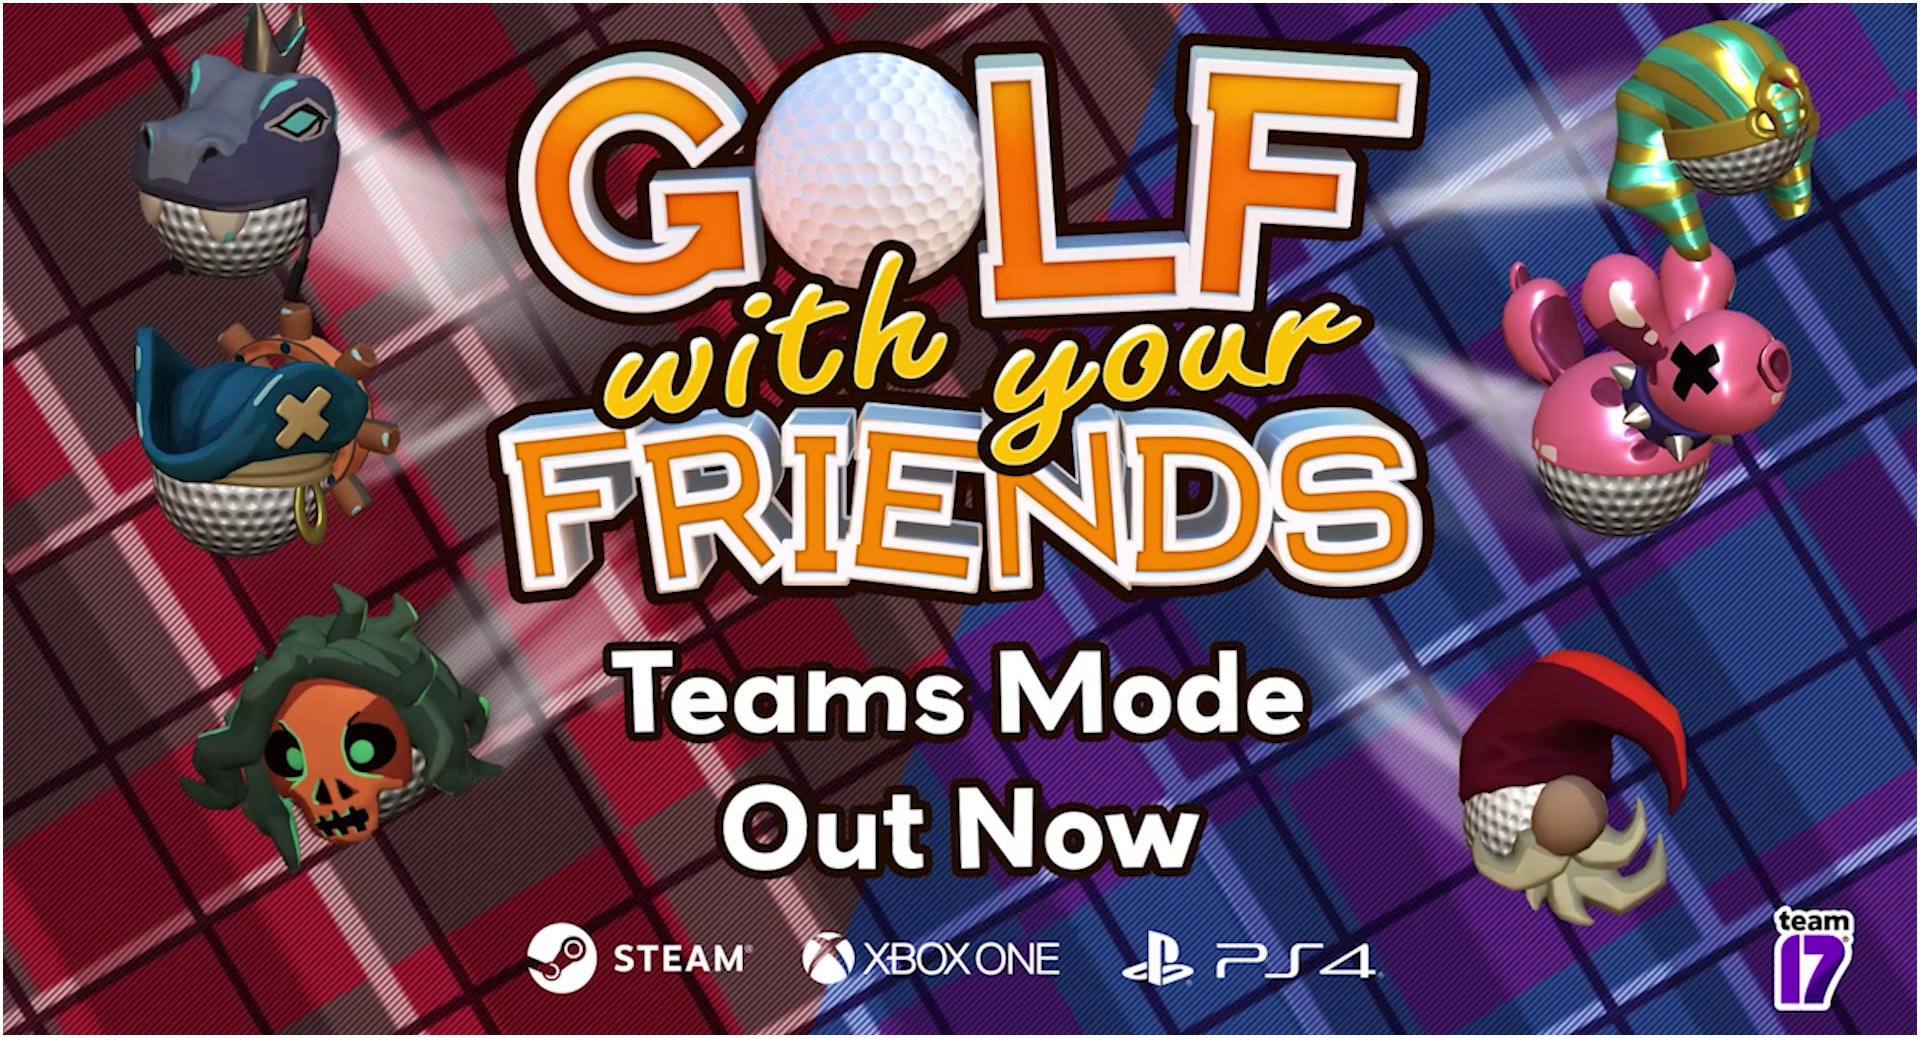 STEAM FREE WEEKEND  FIFA 22 FREE 🔥🔥,GOLF WITH YOUR FRIENDS FREE